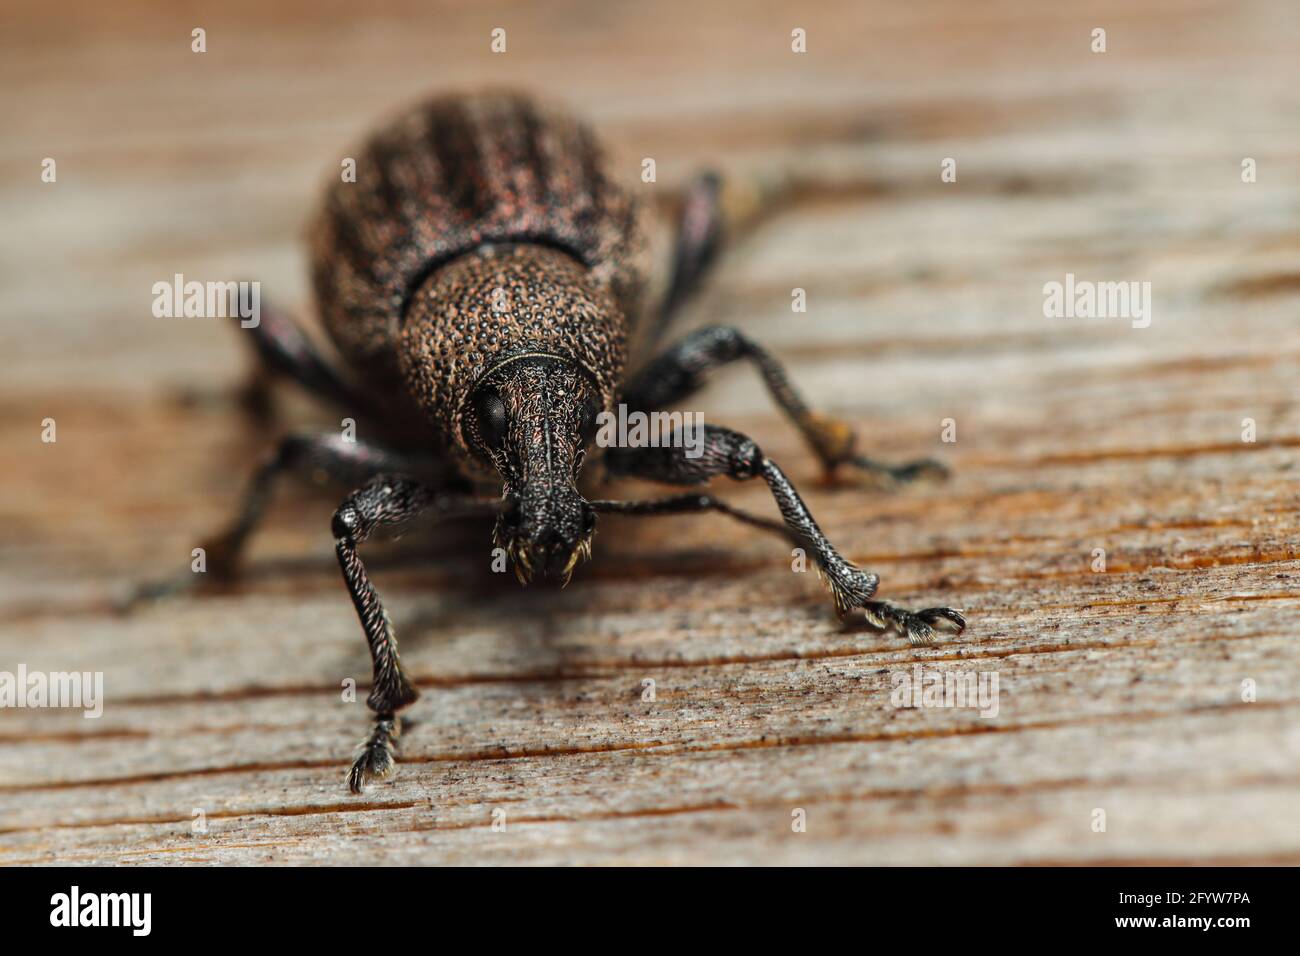 A Pine Weevil walking on a wooden board Stock Photo